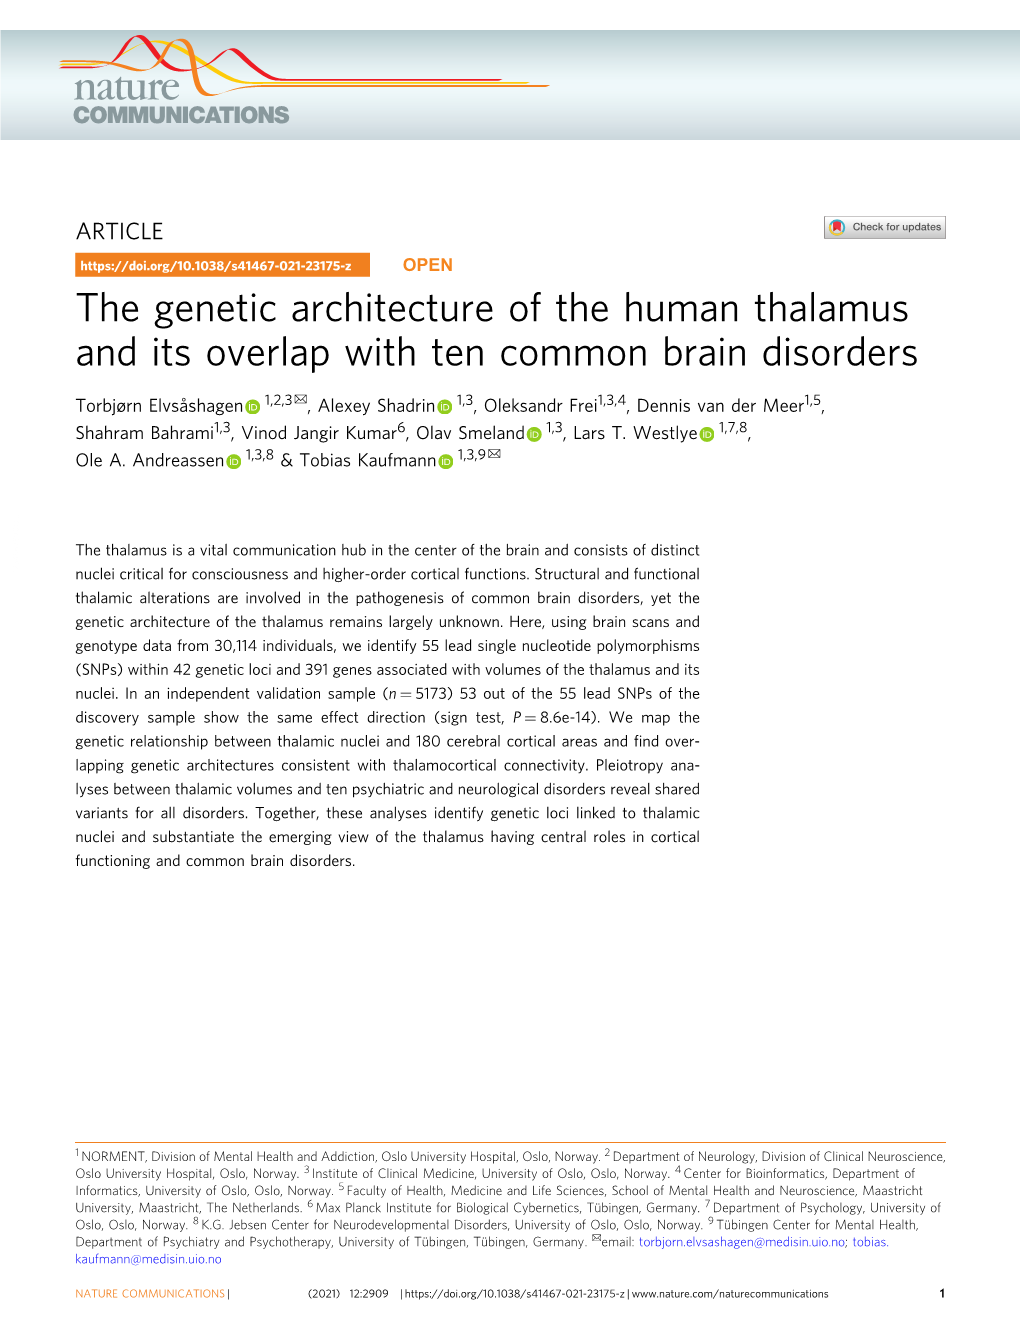 The Genetic Architecture of the Human Thalamus and Its Overlap with Ten